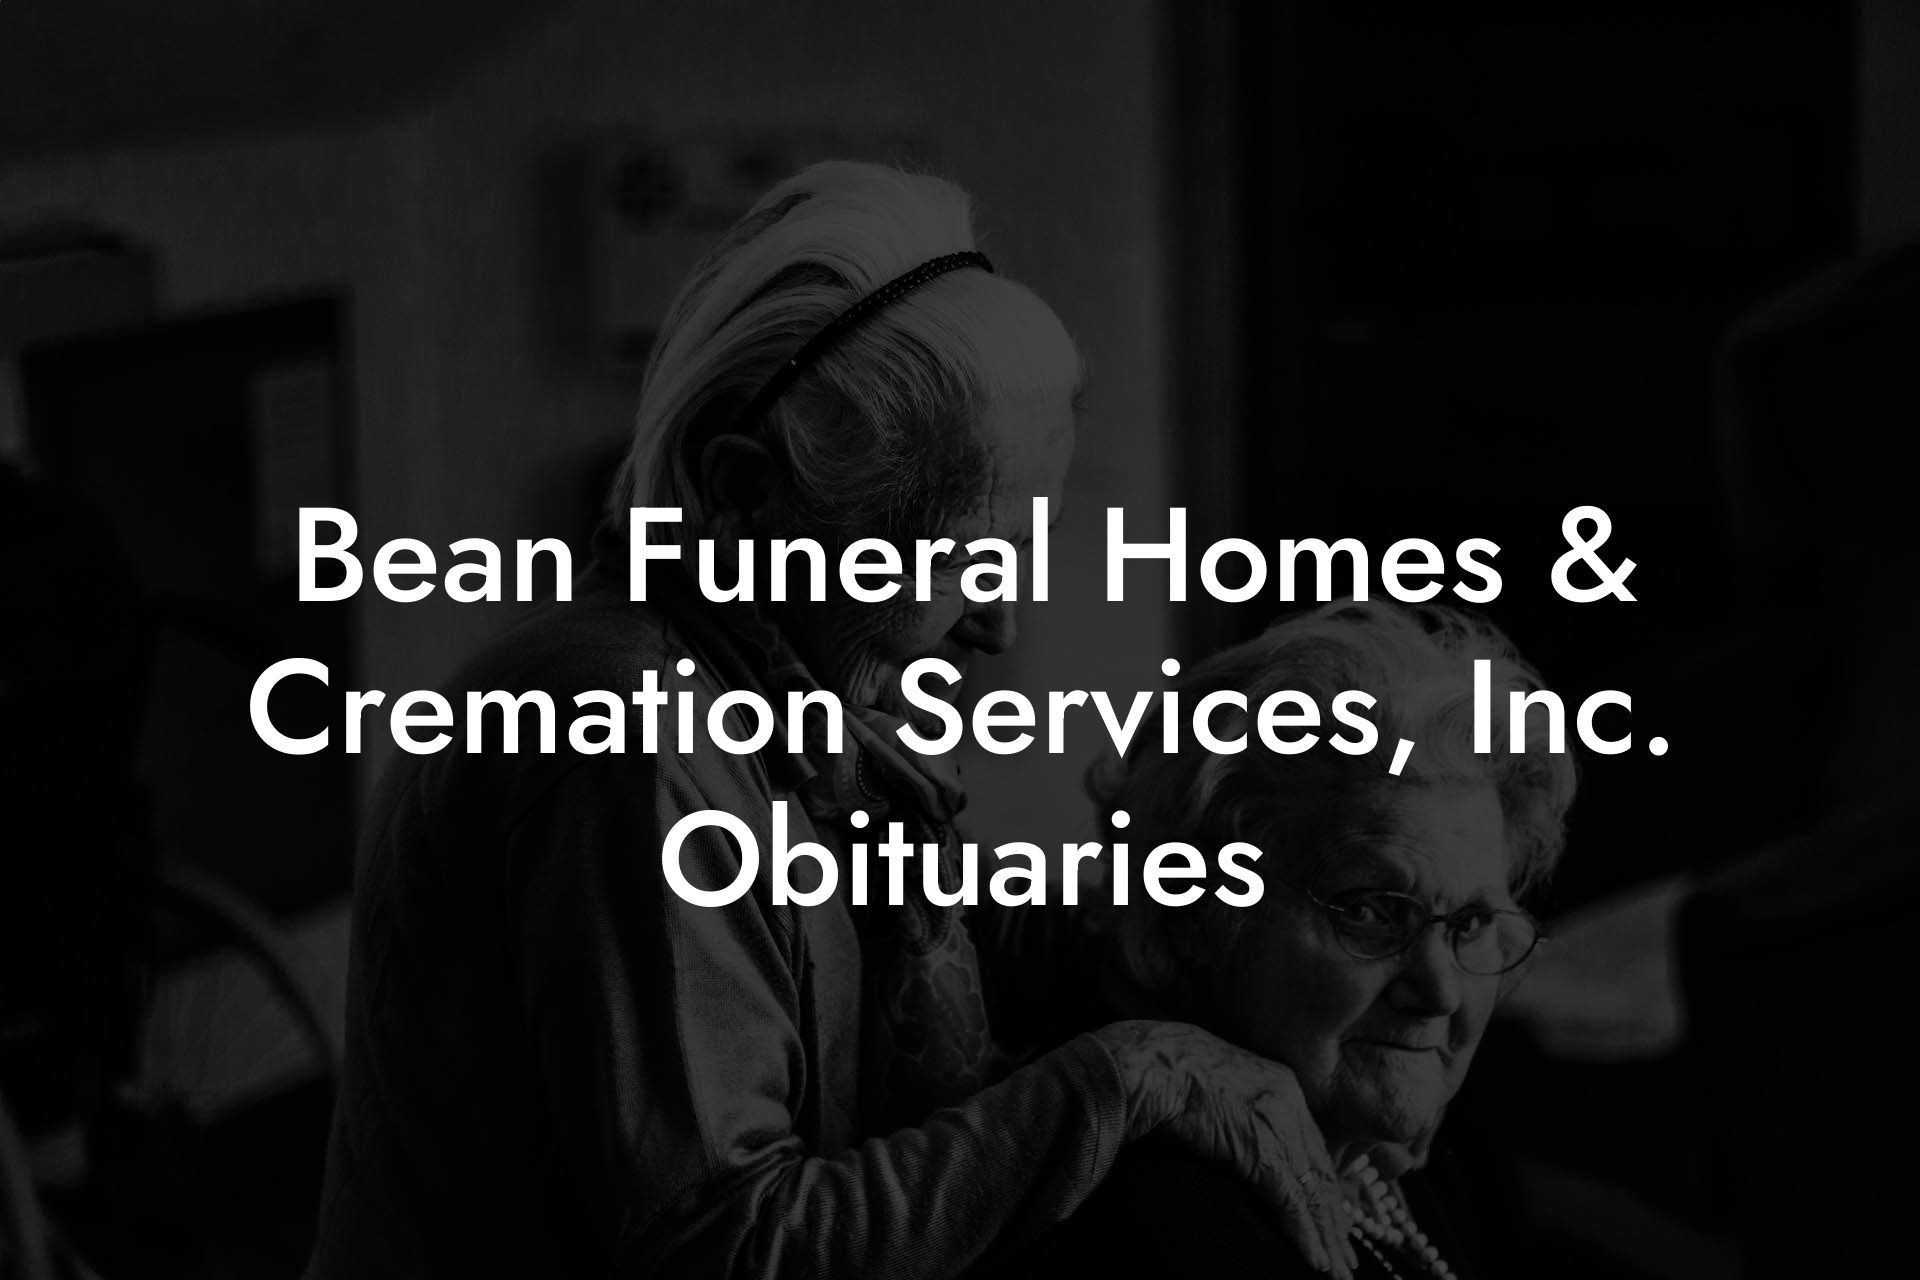 Bean Funeral Homes & Cremation Services, Inc. Obituaries